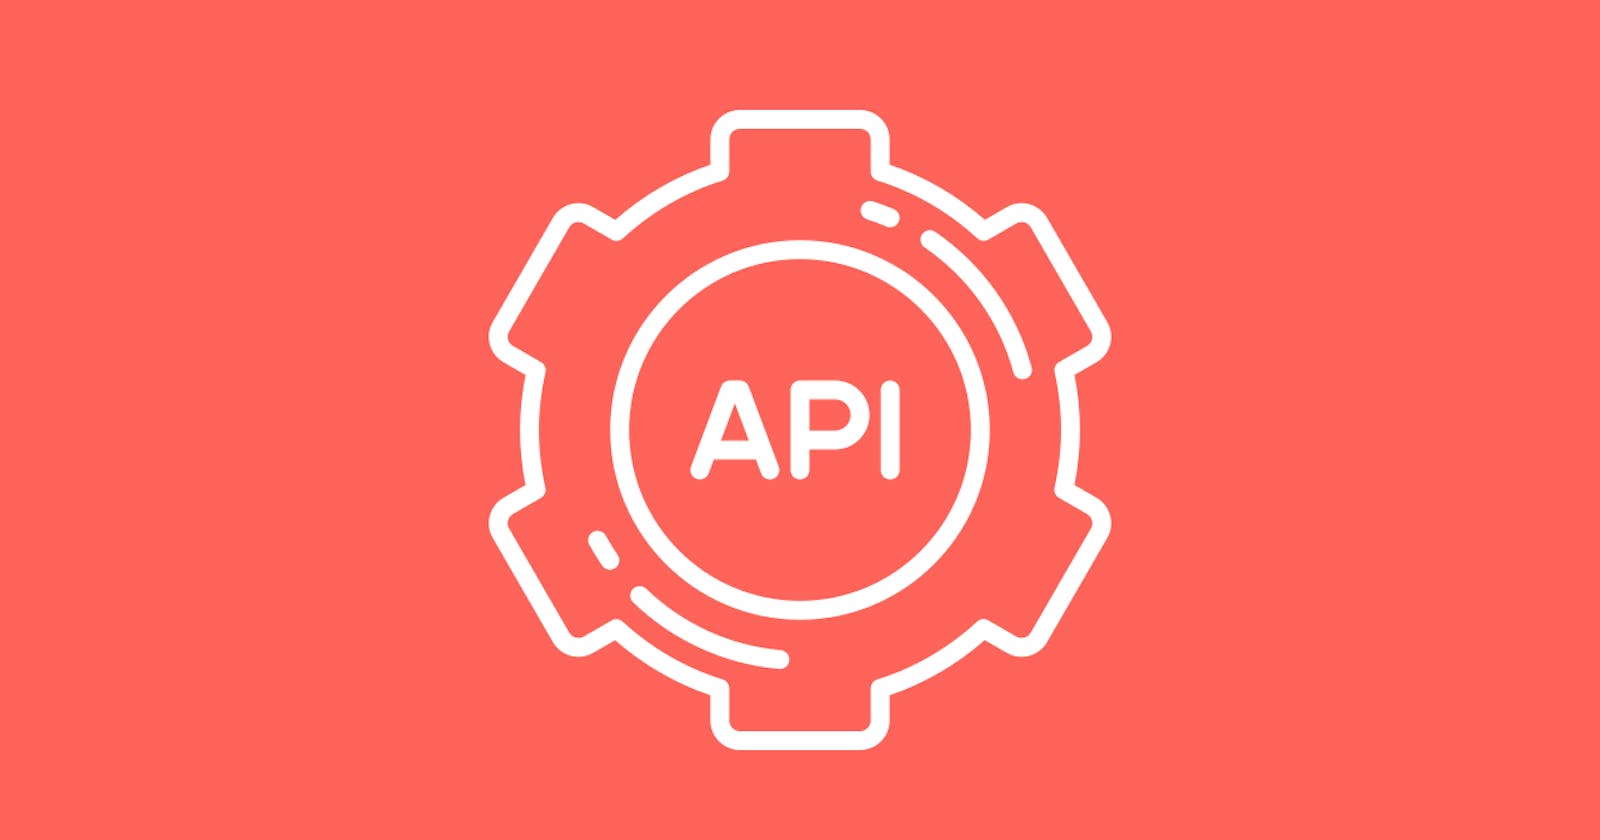 How to build better API products